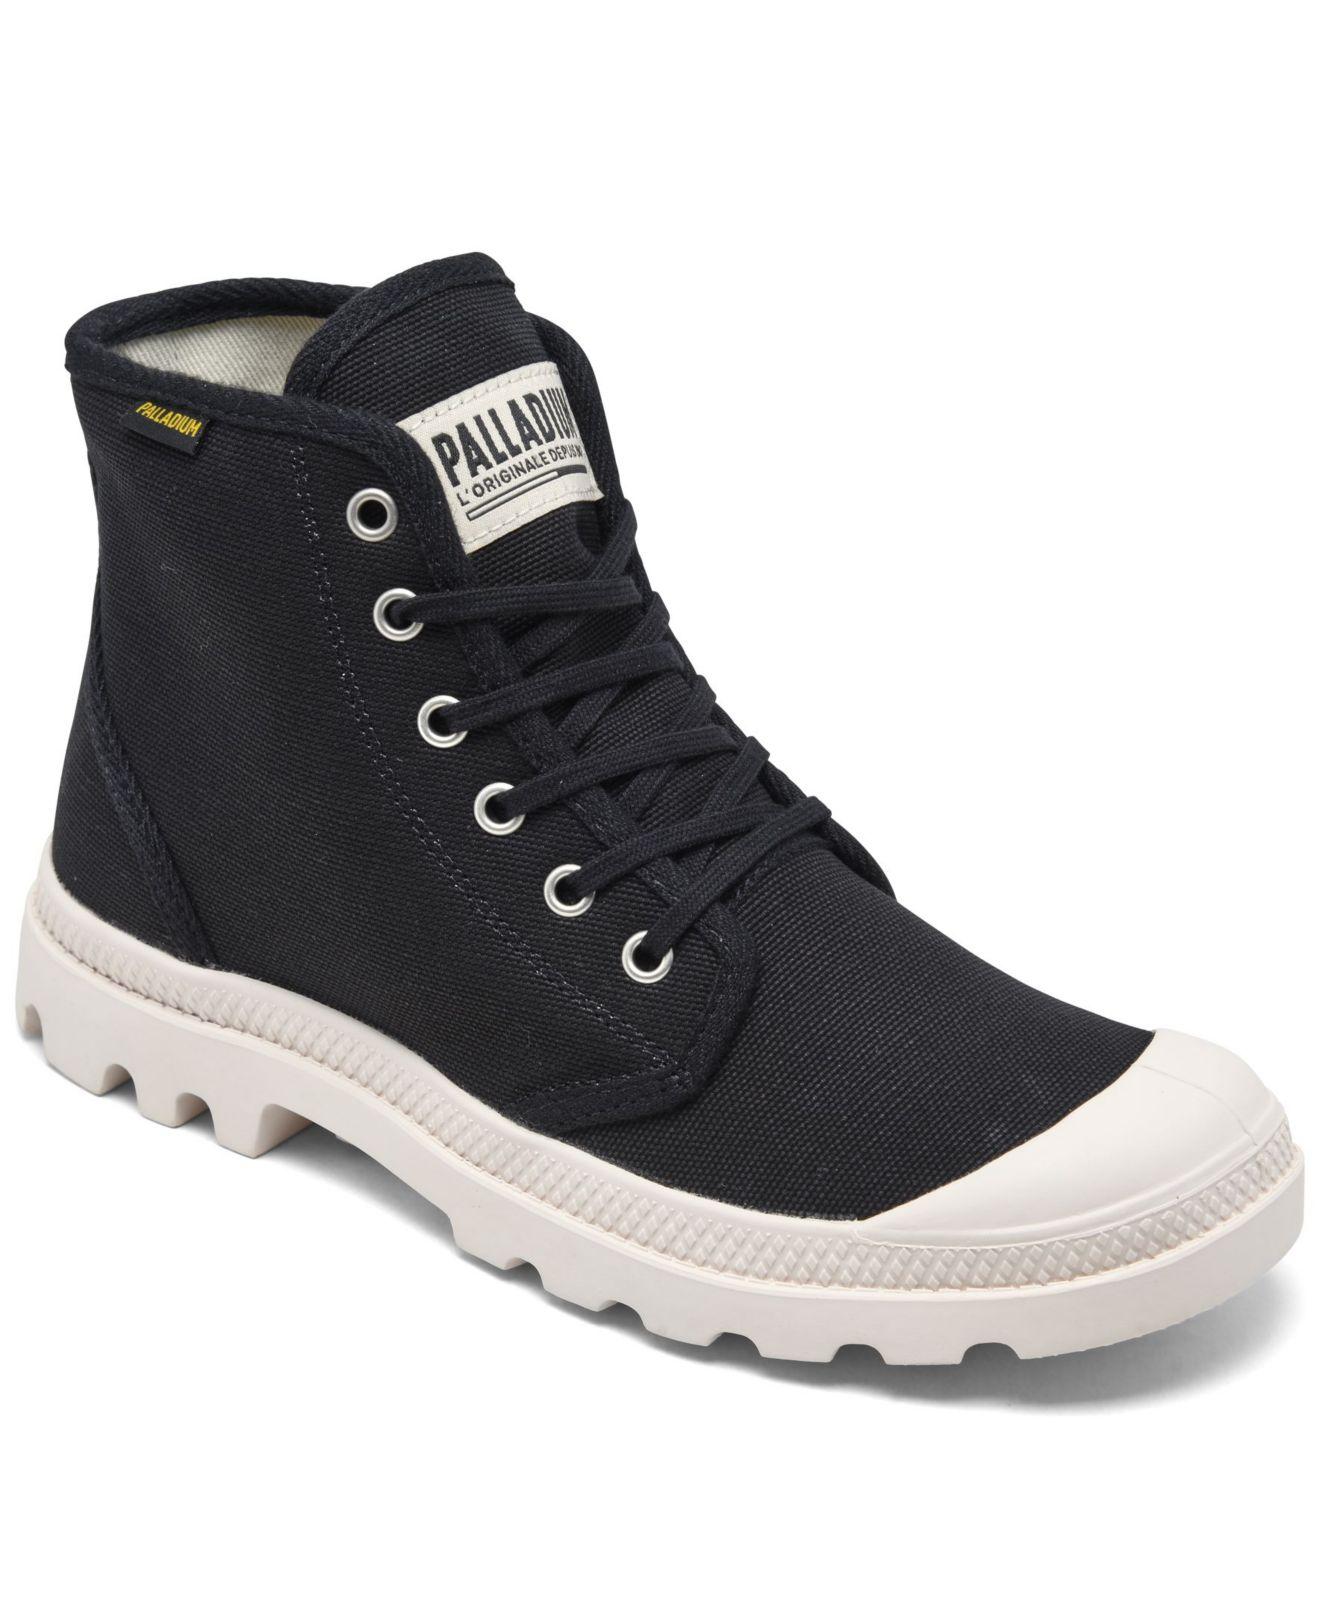 Palladium Canvas Pampa Hi Originale High Top Sneaker Boots From Finish Line  in Black - Lyst